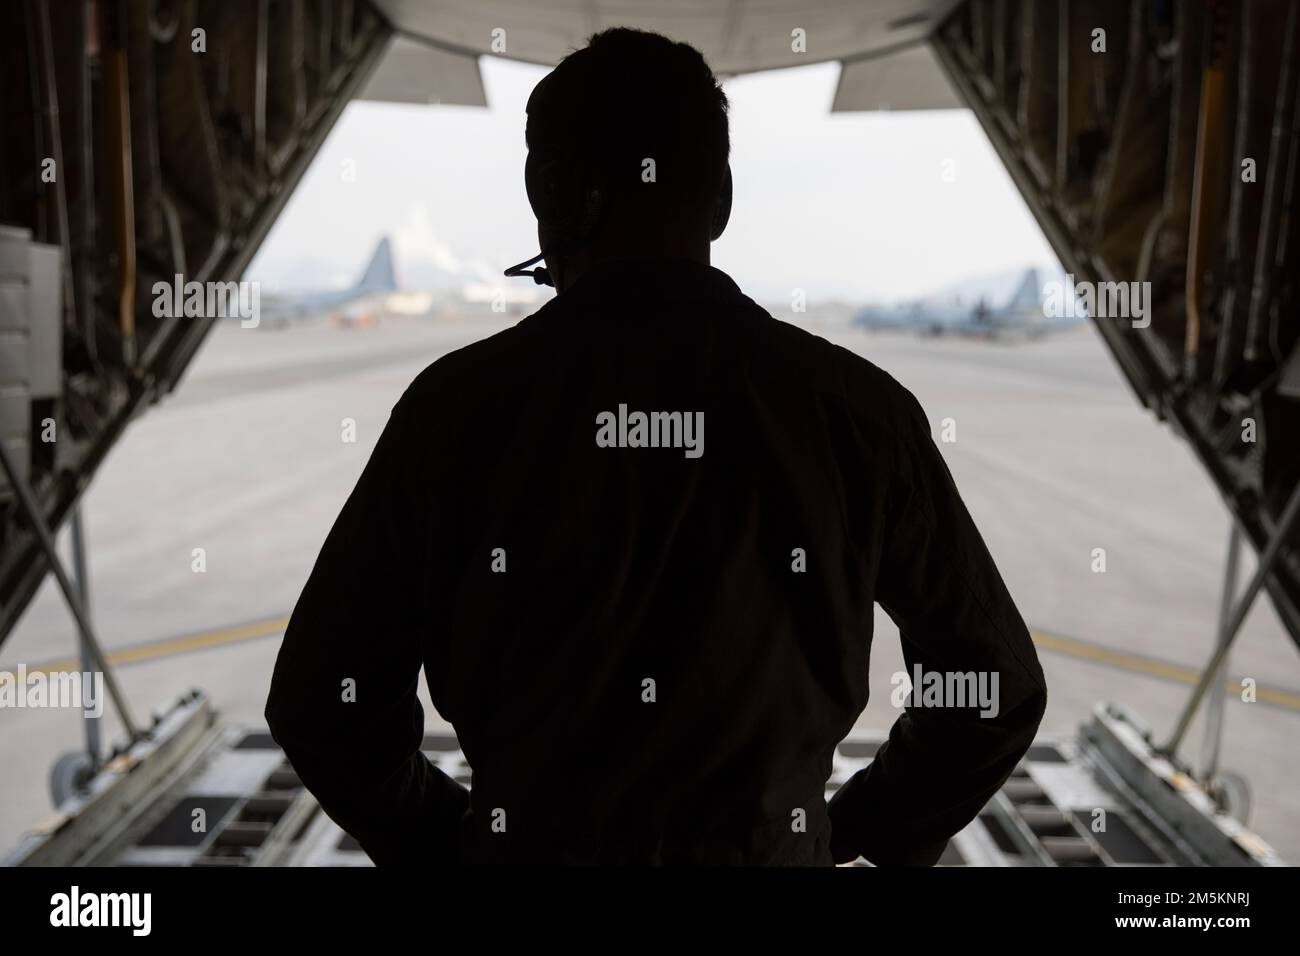 U.S. Marine Corps Sgt. Calvin Shirey, a loadmaster with Marine Aerial Refueler Transport Squadron (VMGR) 152 stands on the ramp of a KC-130J Super Hercules at Marine Corps Air Station Iwakuni, Japan, March 23, 2022. Marines with VMGR-152 supported Marines with Marine Fighter Attack Squadron 121 during a training flight simulating close air support at Camp Fuji, Japan. Marine Corps aviation routinely conducts training throughout the region to remain combat-ready in support of a free and open Indo-Pacific and to demonstrate our commitment to the Treaty of Mutual Cooperation and Security between Stock Photo